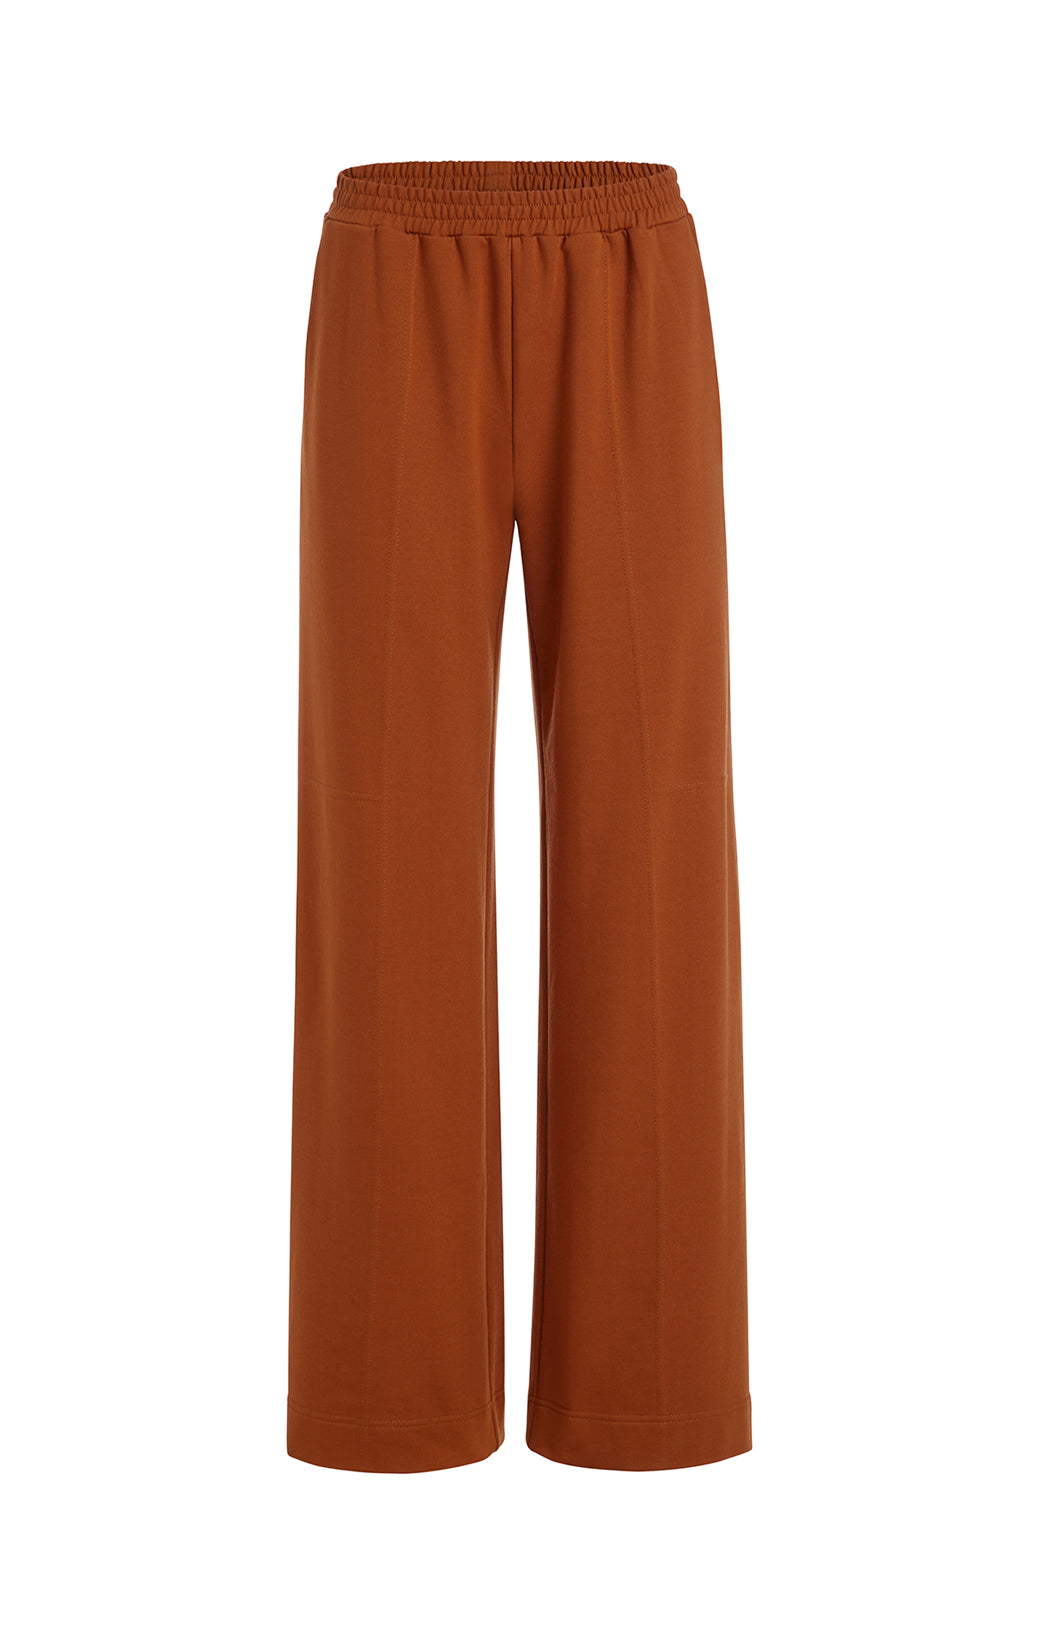 Patisserie - Stretch Cotton Twill Sailor Pants Update - IMAGE